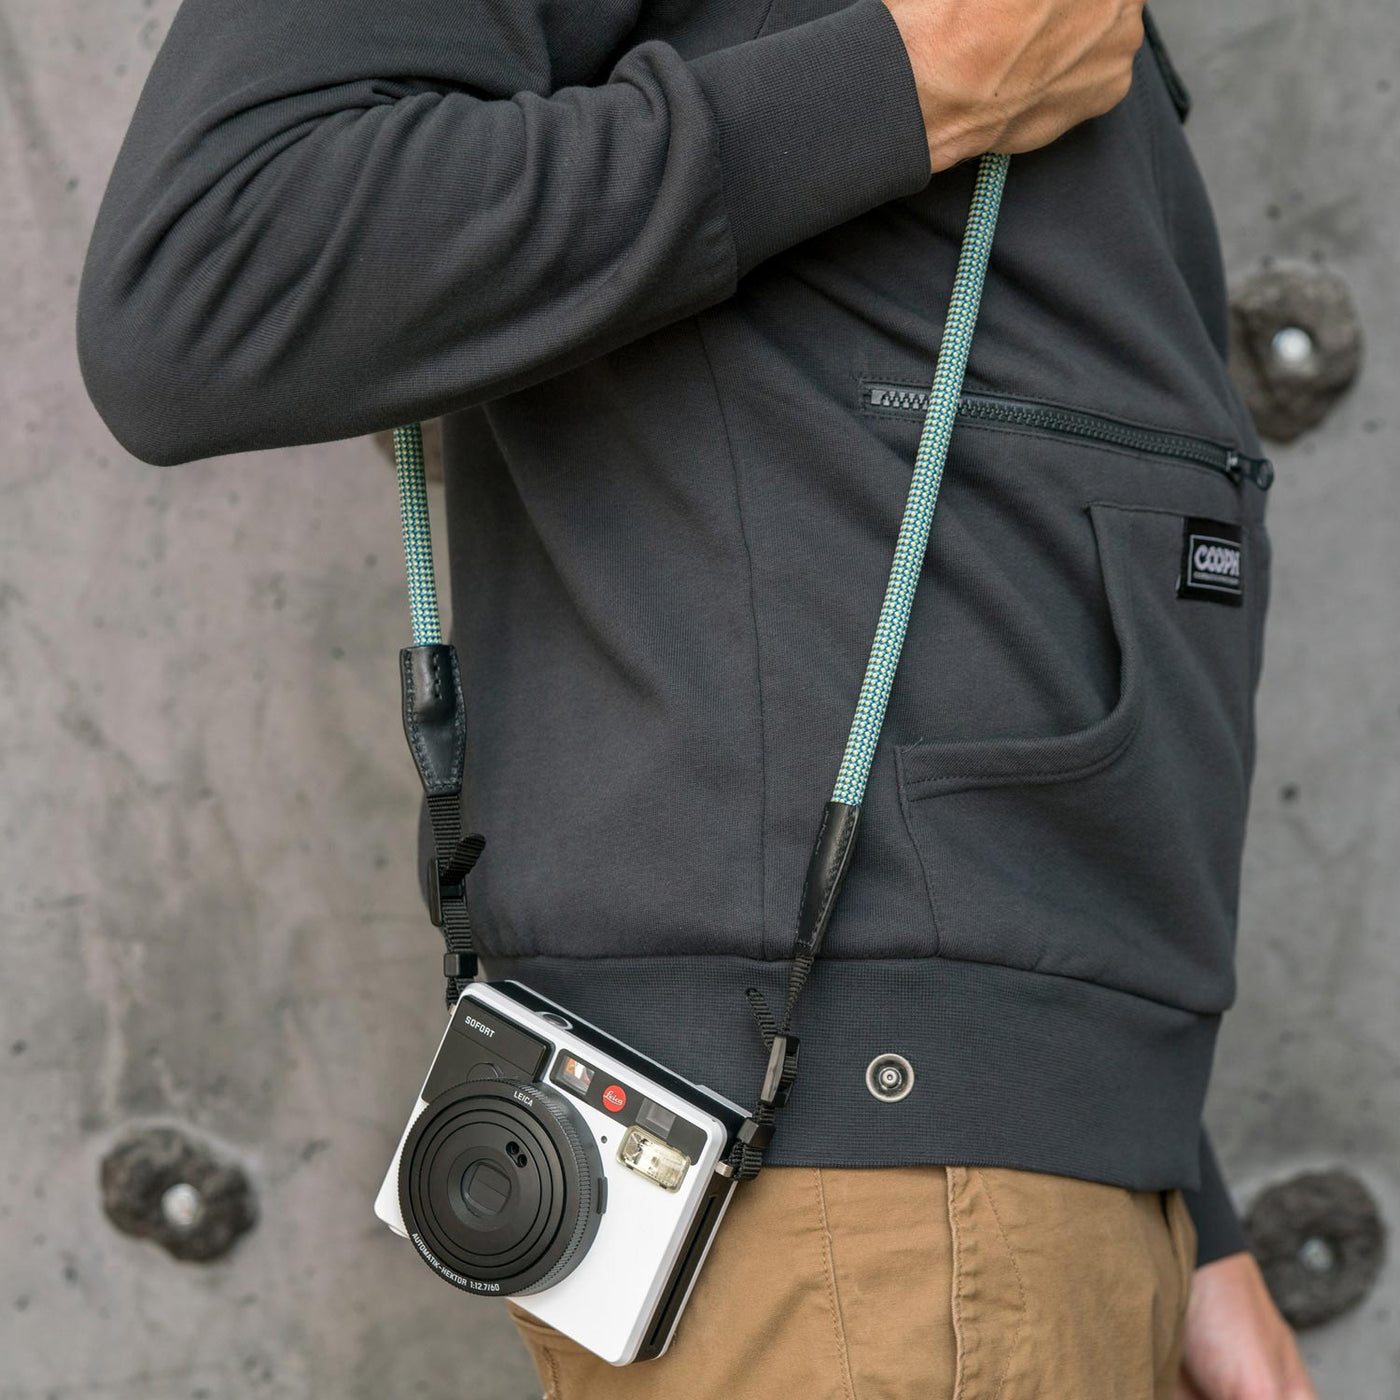 Leica camera on a photographer's hip held with rope strap 